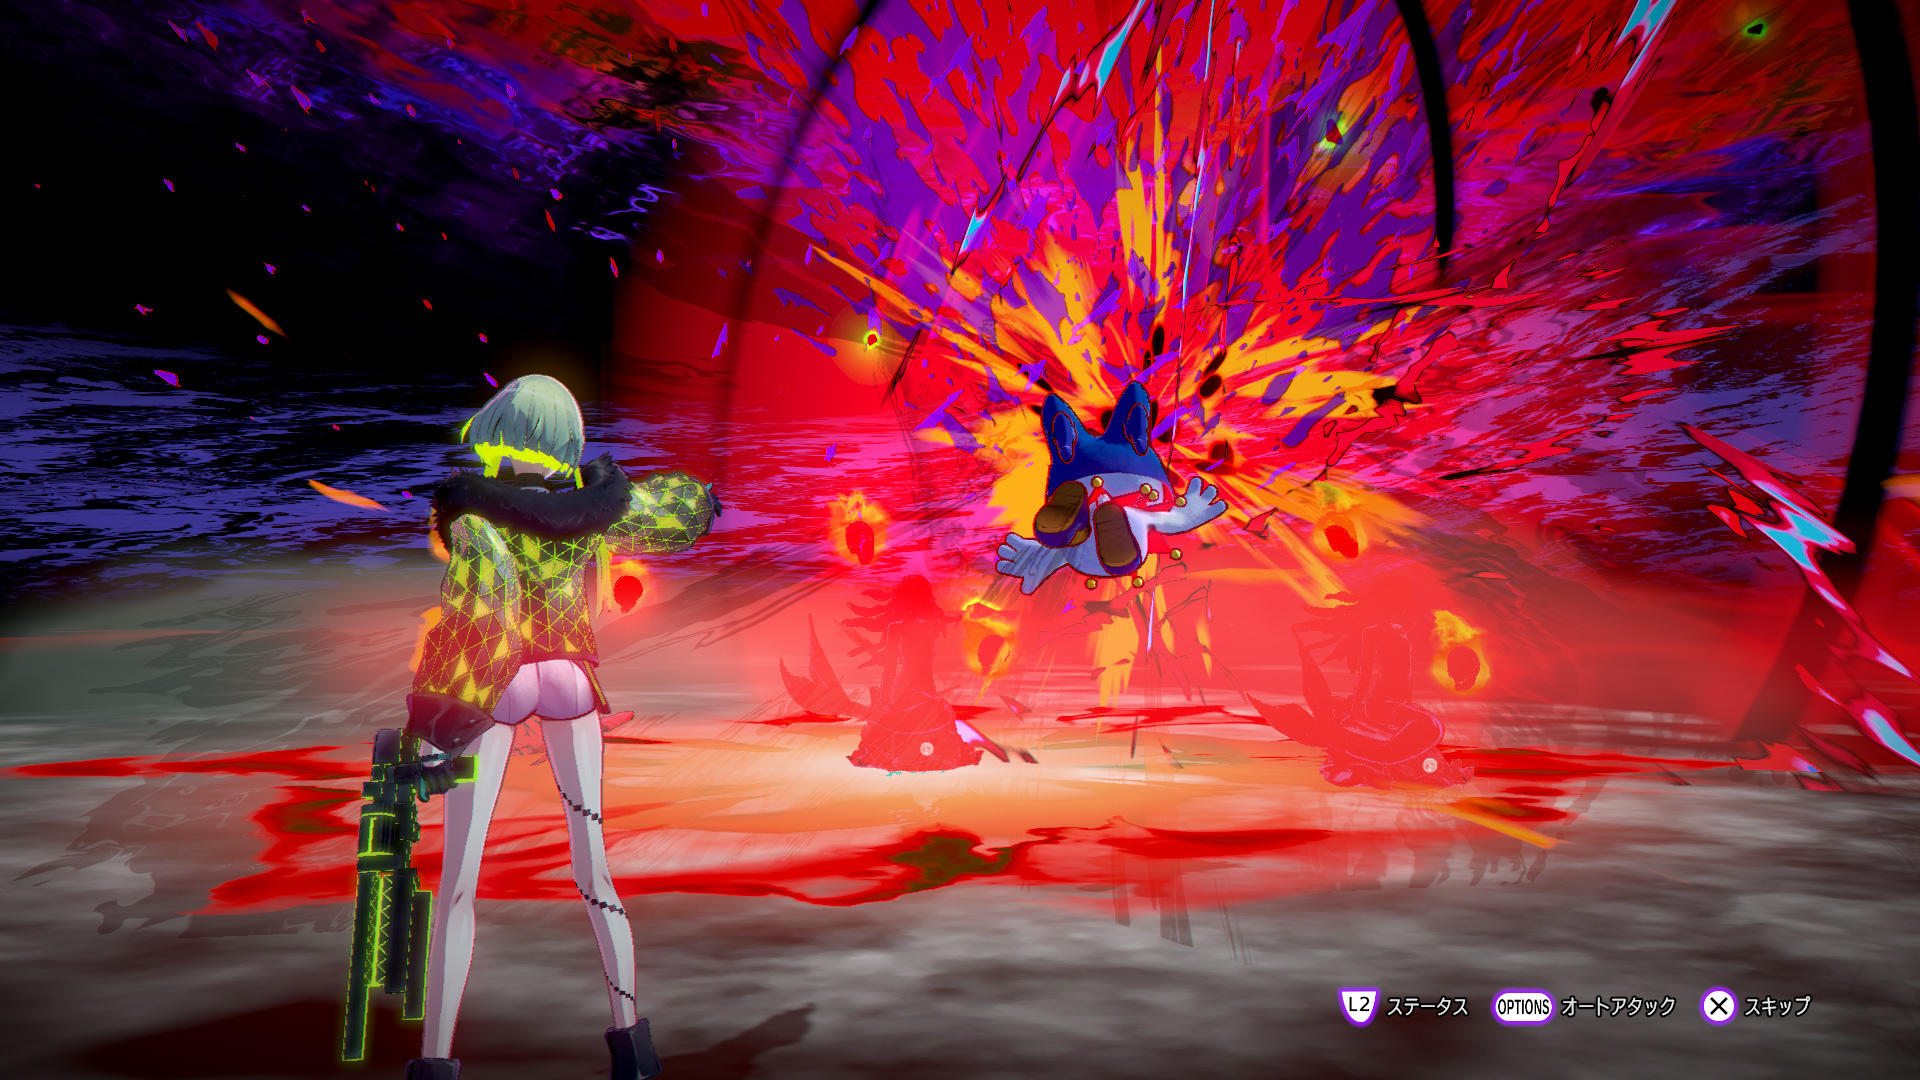 Roundup: Here's What The Critics Think Of JRPG 'Soul Hackers 2